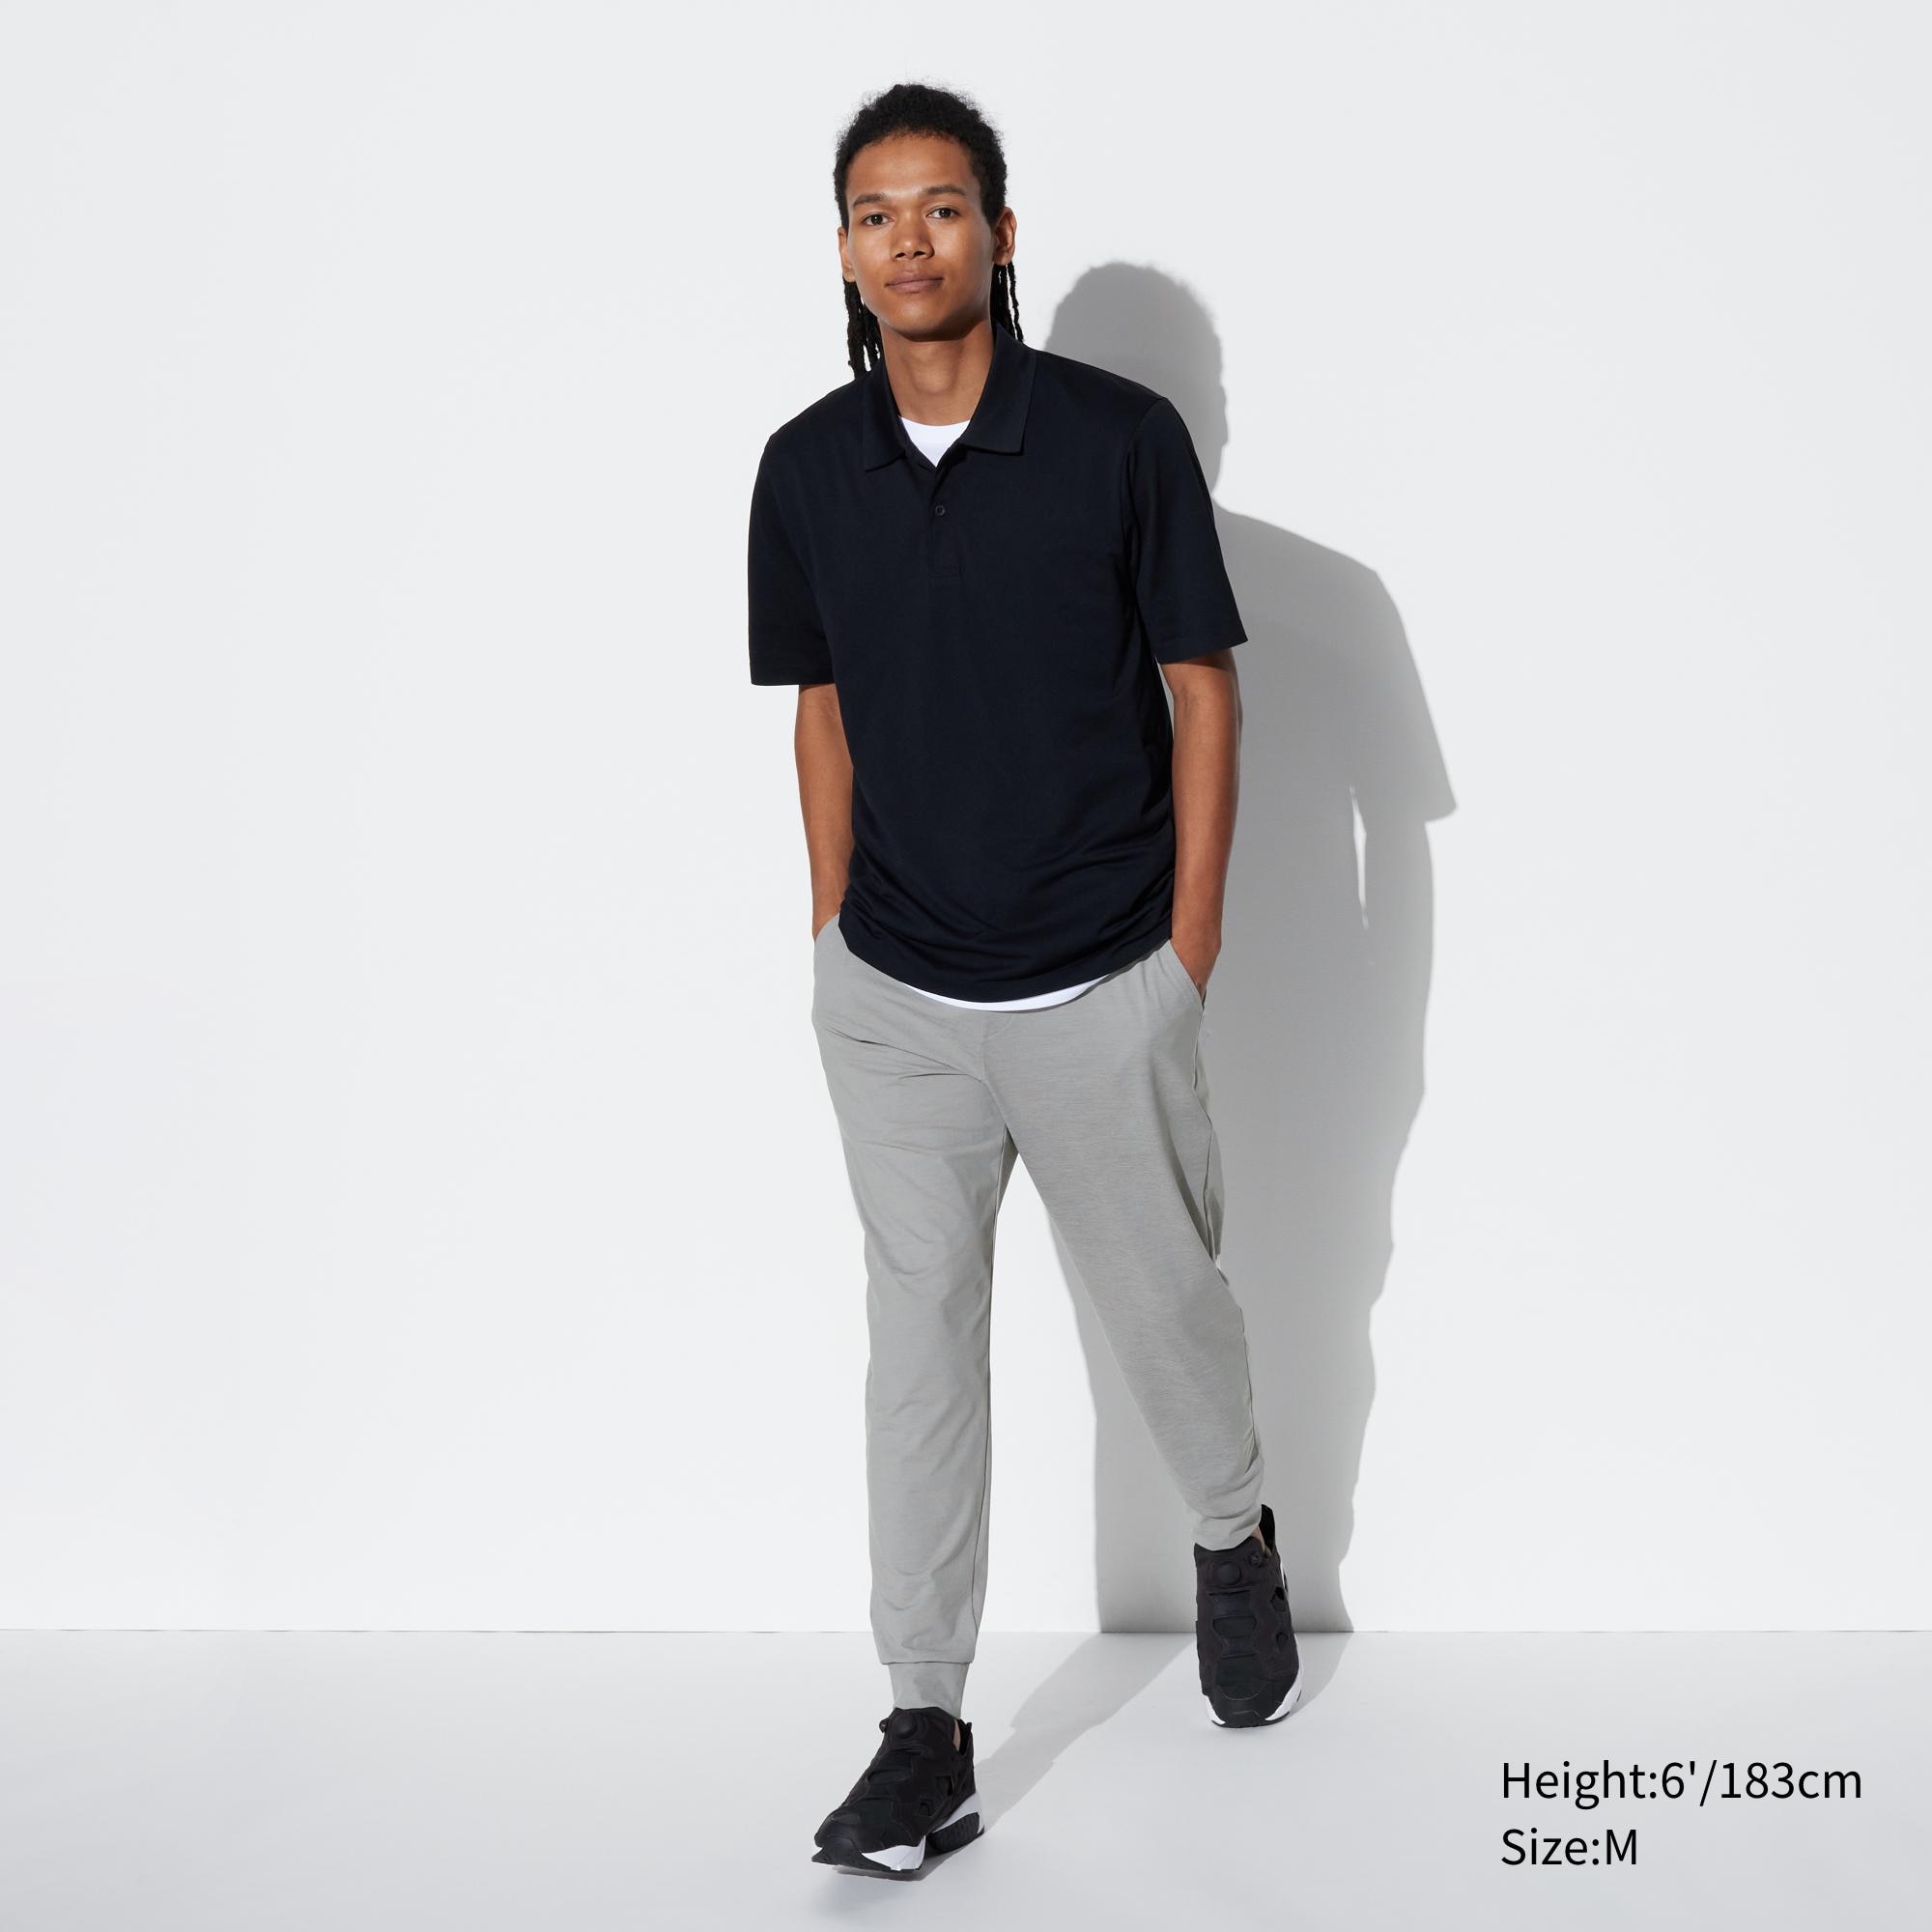 Buy Uniqlo WOMEN ULTRA STRETCH ACTIVE JOGGER PANTS online